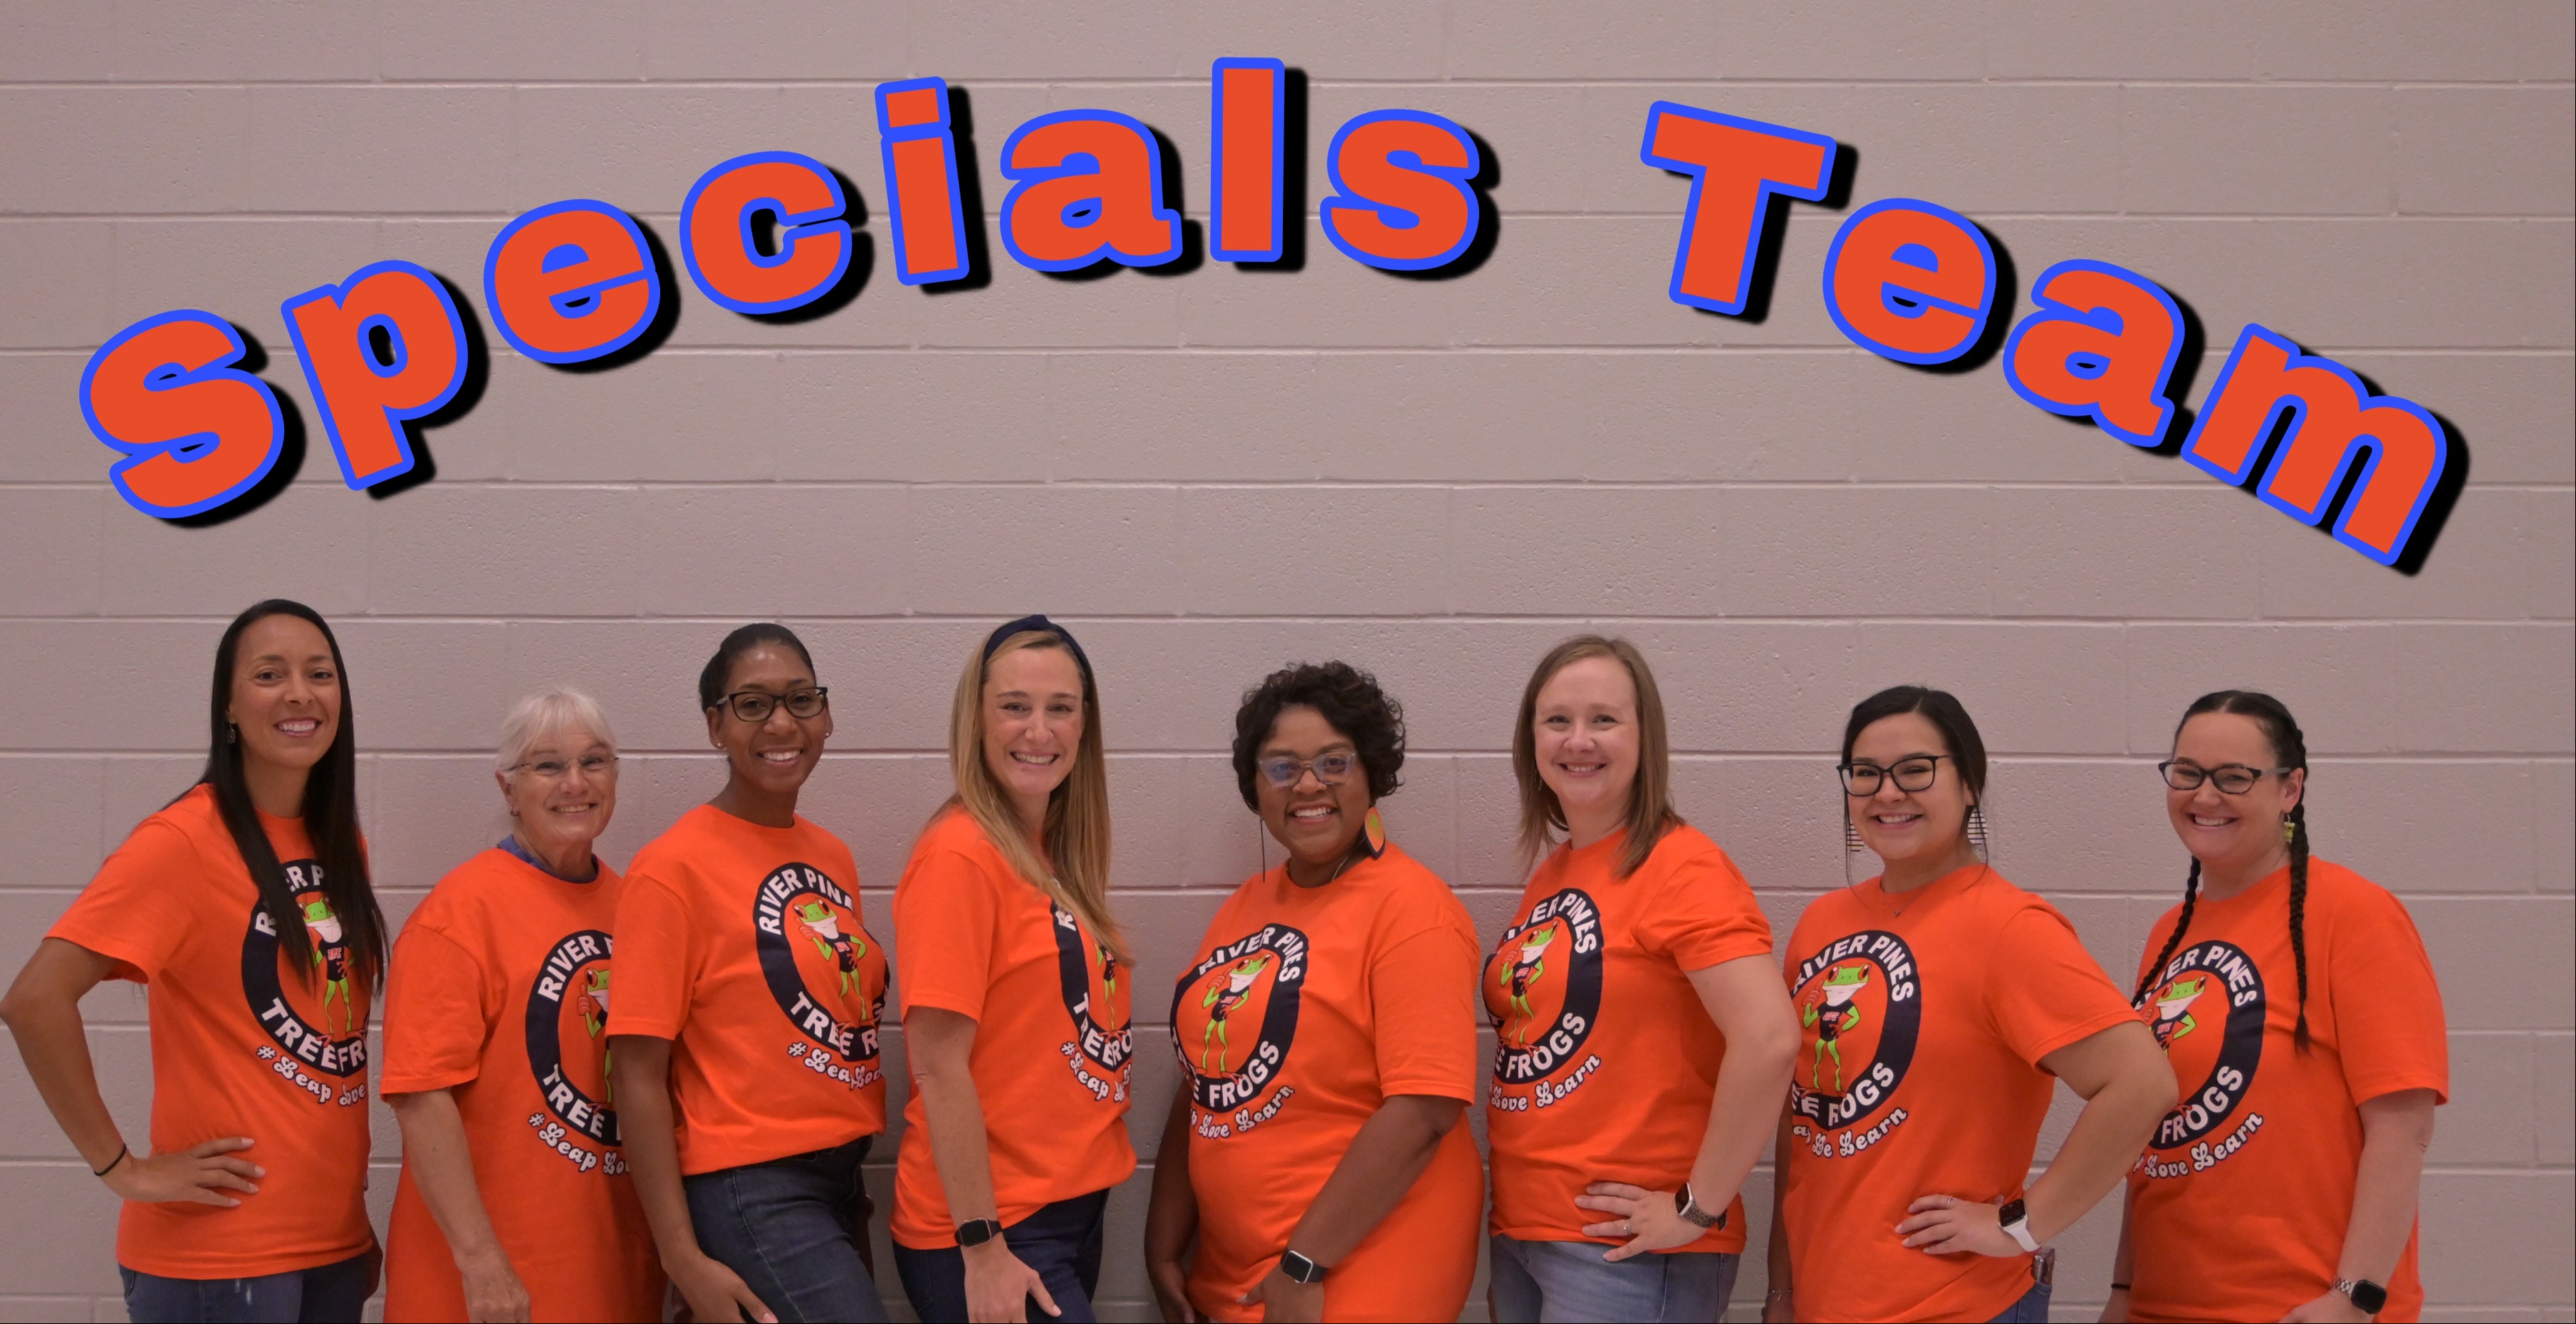 group of teachers in orange shirts standing posing in front of gray brick wall